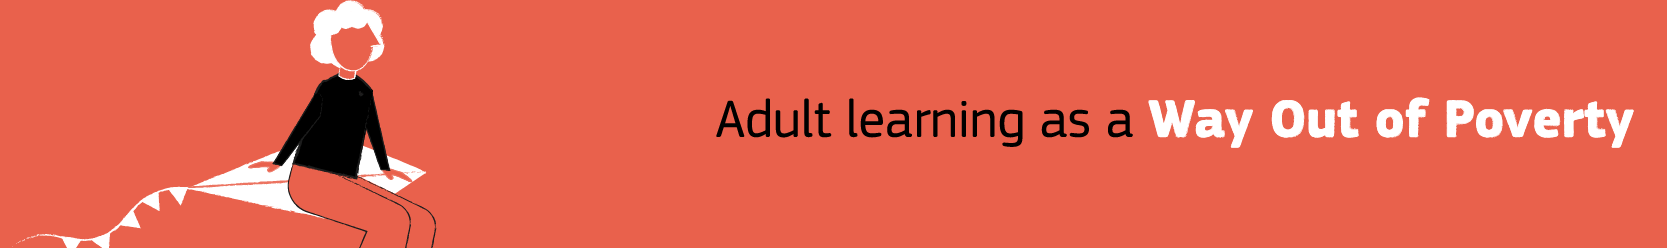 Adult Learning as a Way Out of Poverty